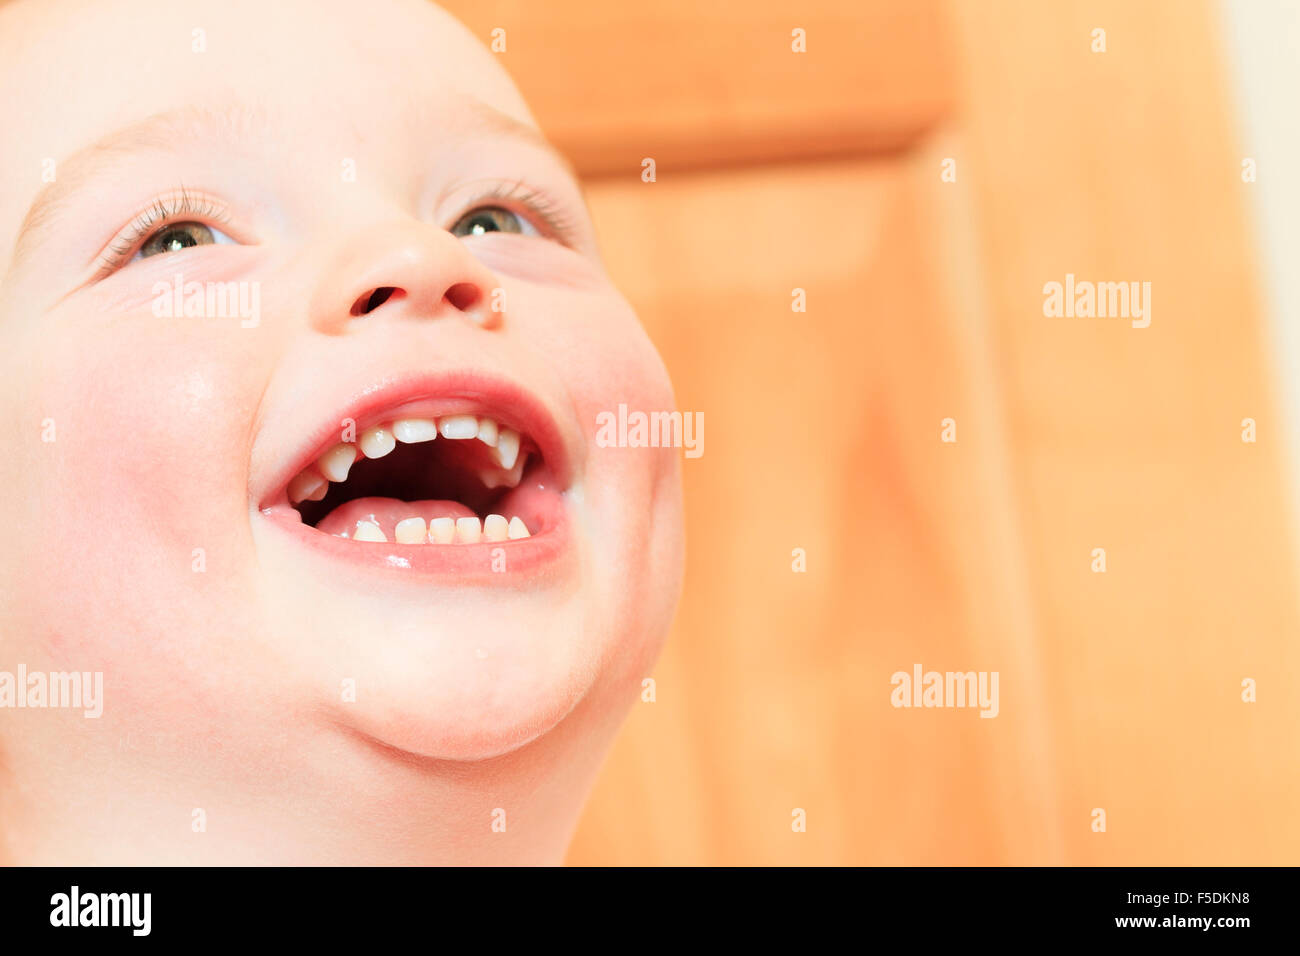 Happy 2 years old baby boy. Kid is smiling, grinning. Stock Photo